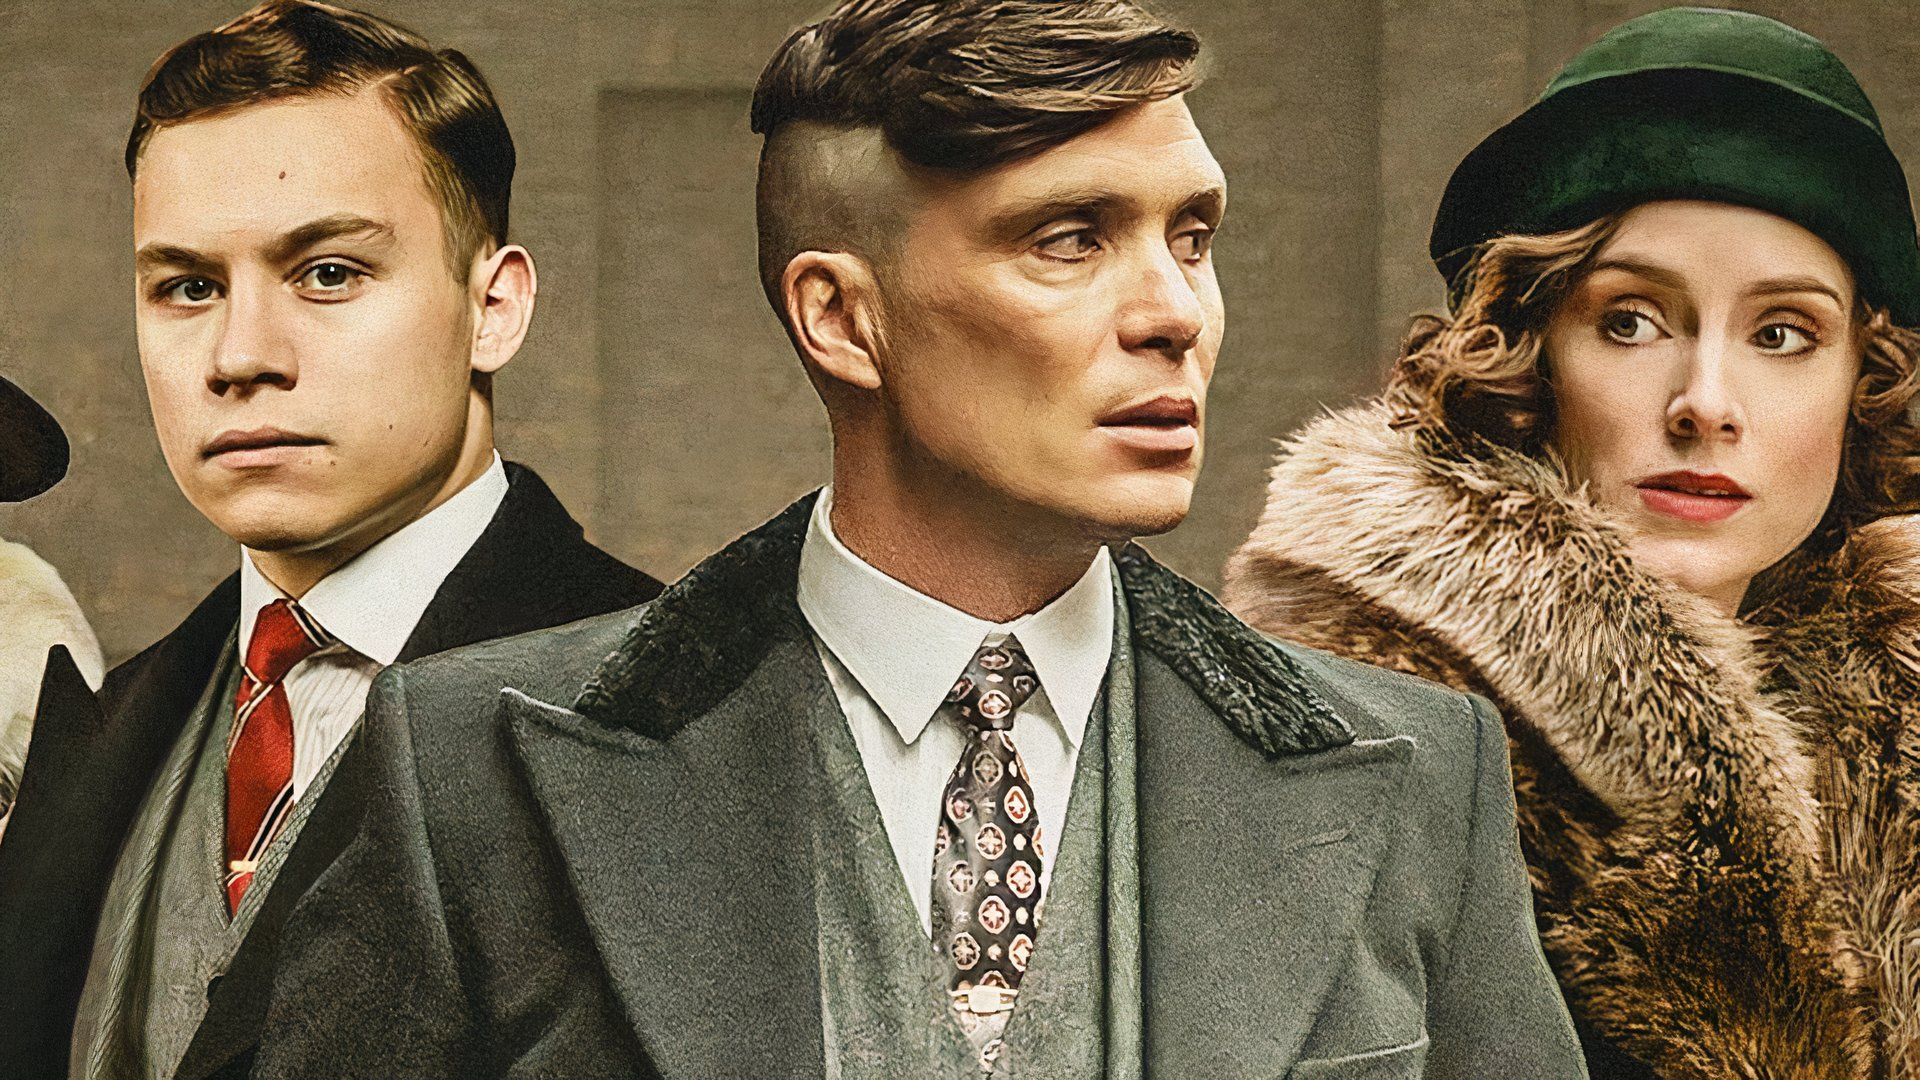 The cast of Peaky Blinders including Cillian Murphy as Tommy Shelby